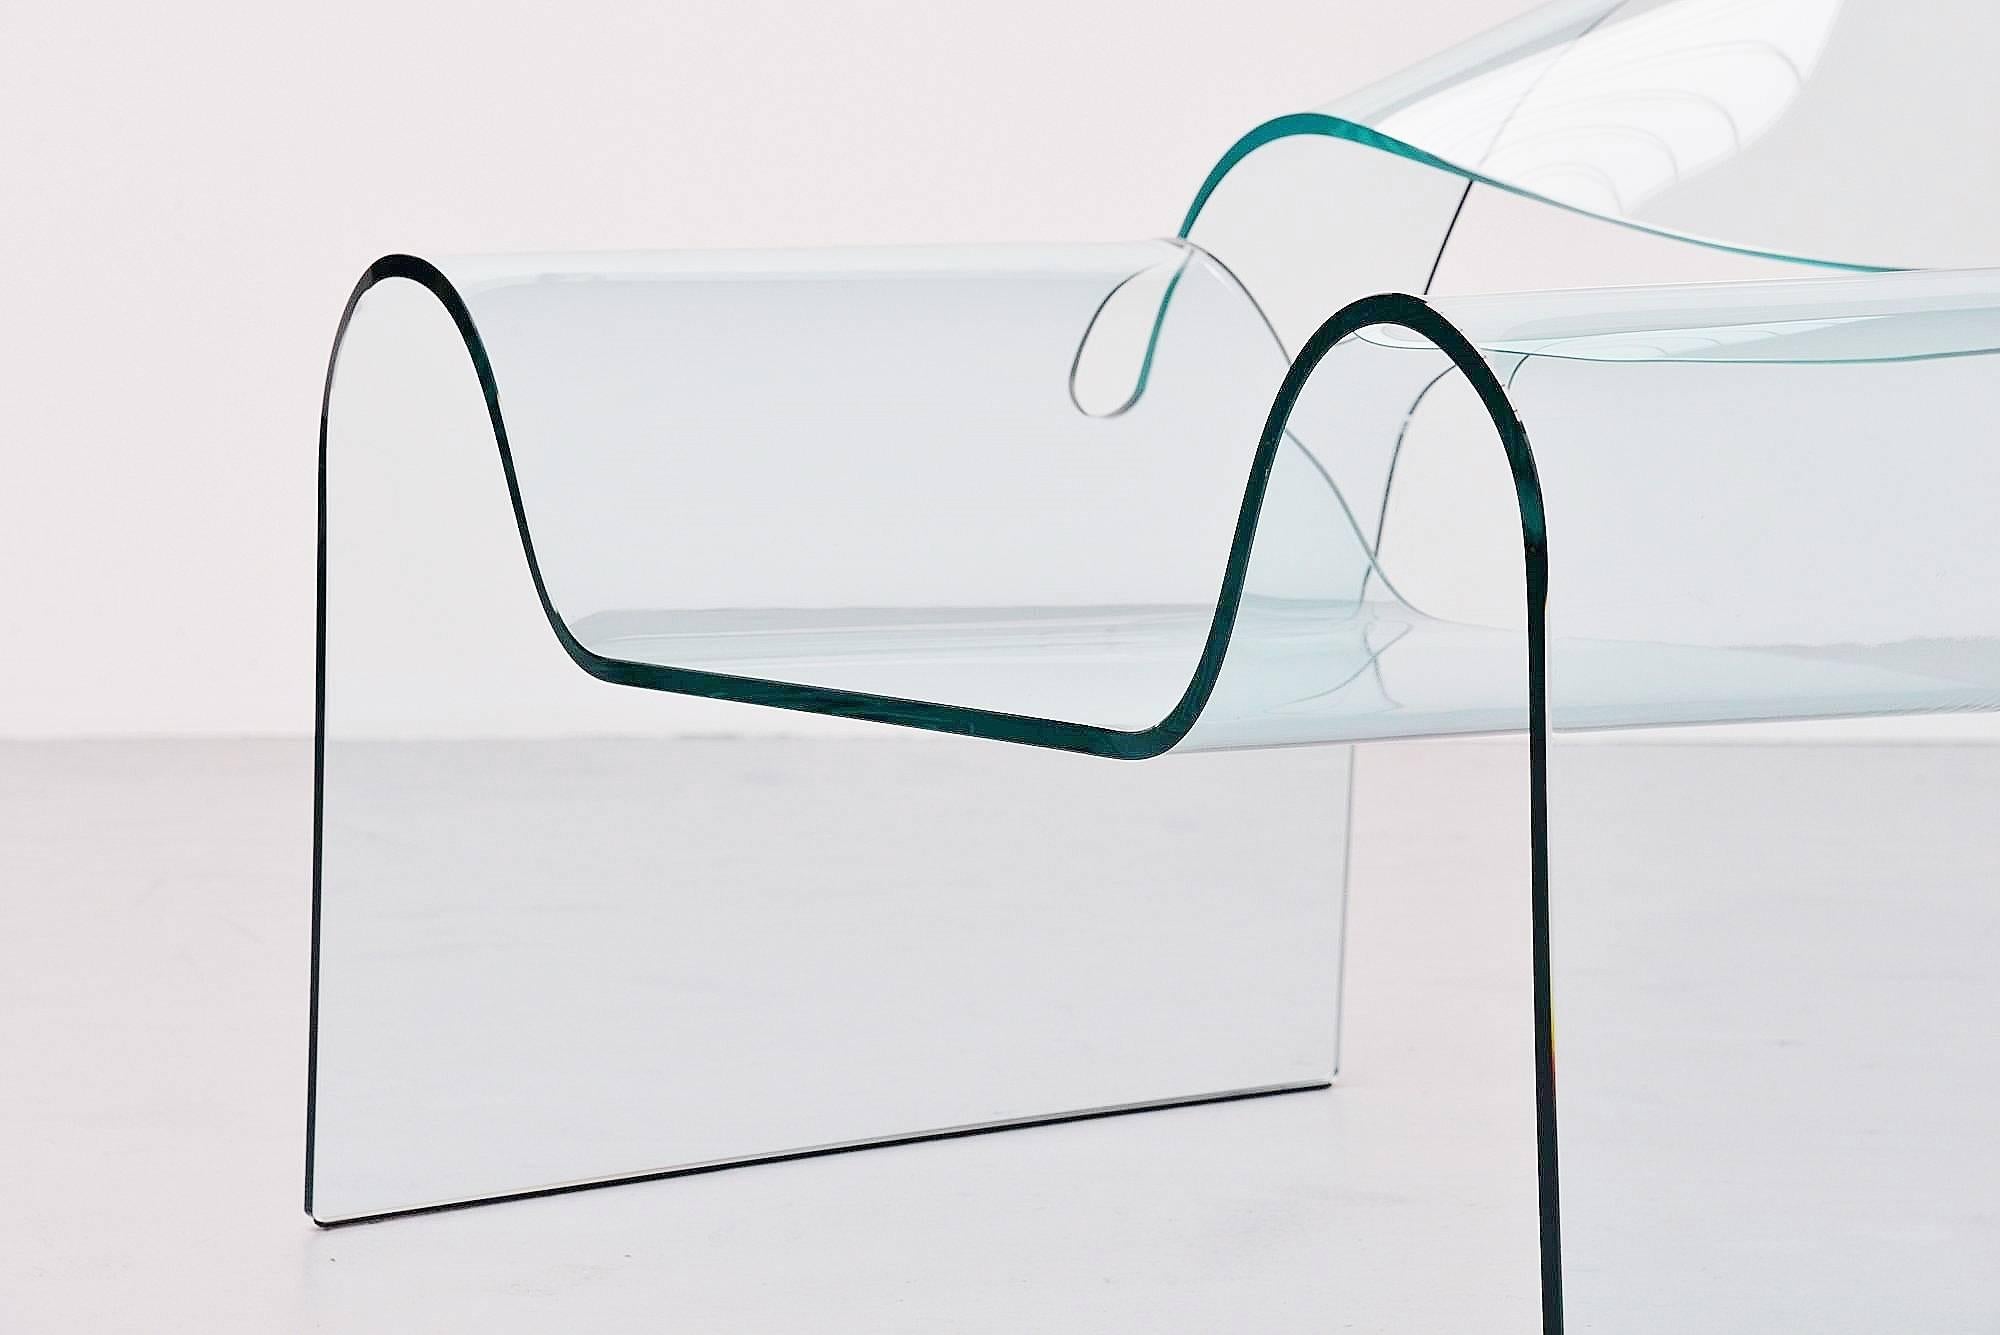 This is for the famous Ghost chair designed by Cini Boeri and Tomu Katayanagi and manufactured by Fiam, Italy, 1987. This fantastic transparent 12mm glass chair was made of thick curved & hardened glass and has a load capacity of 150 KG. This